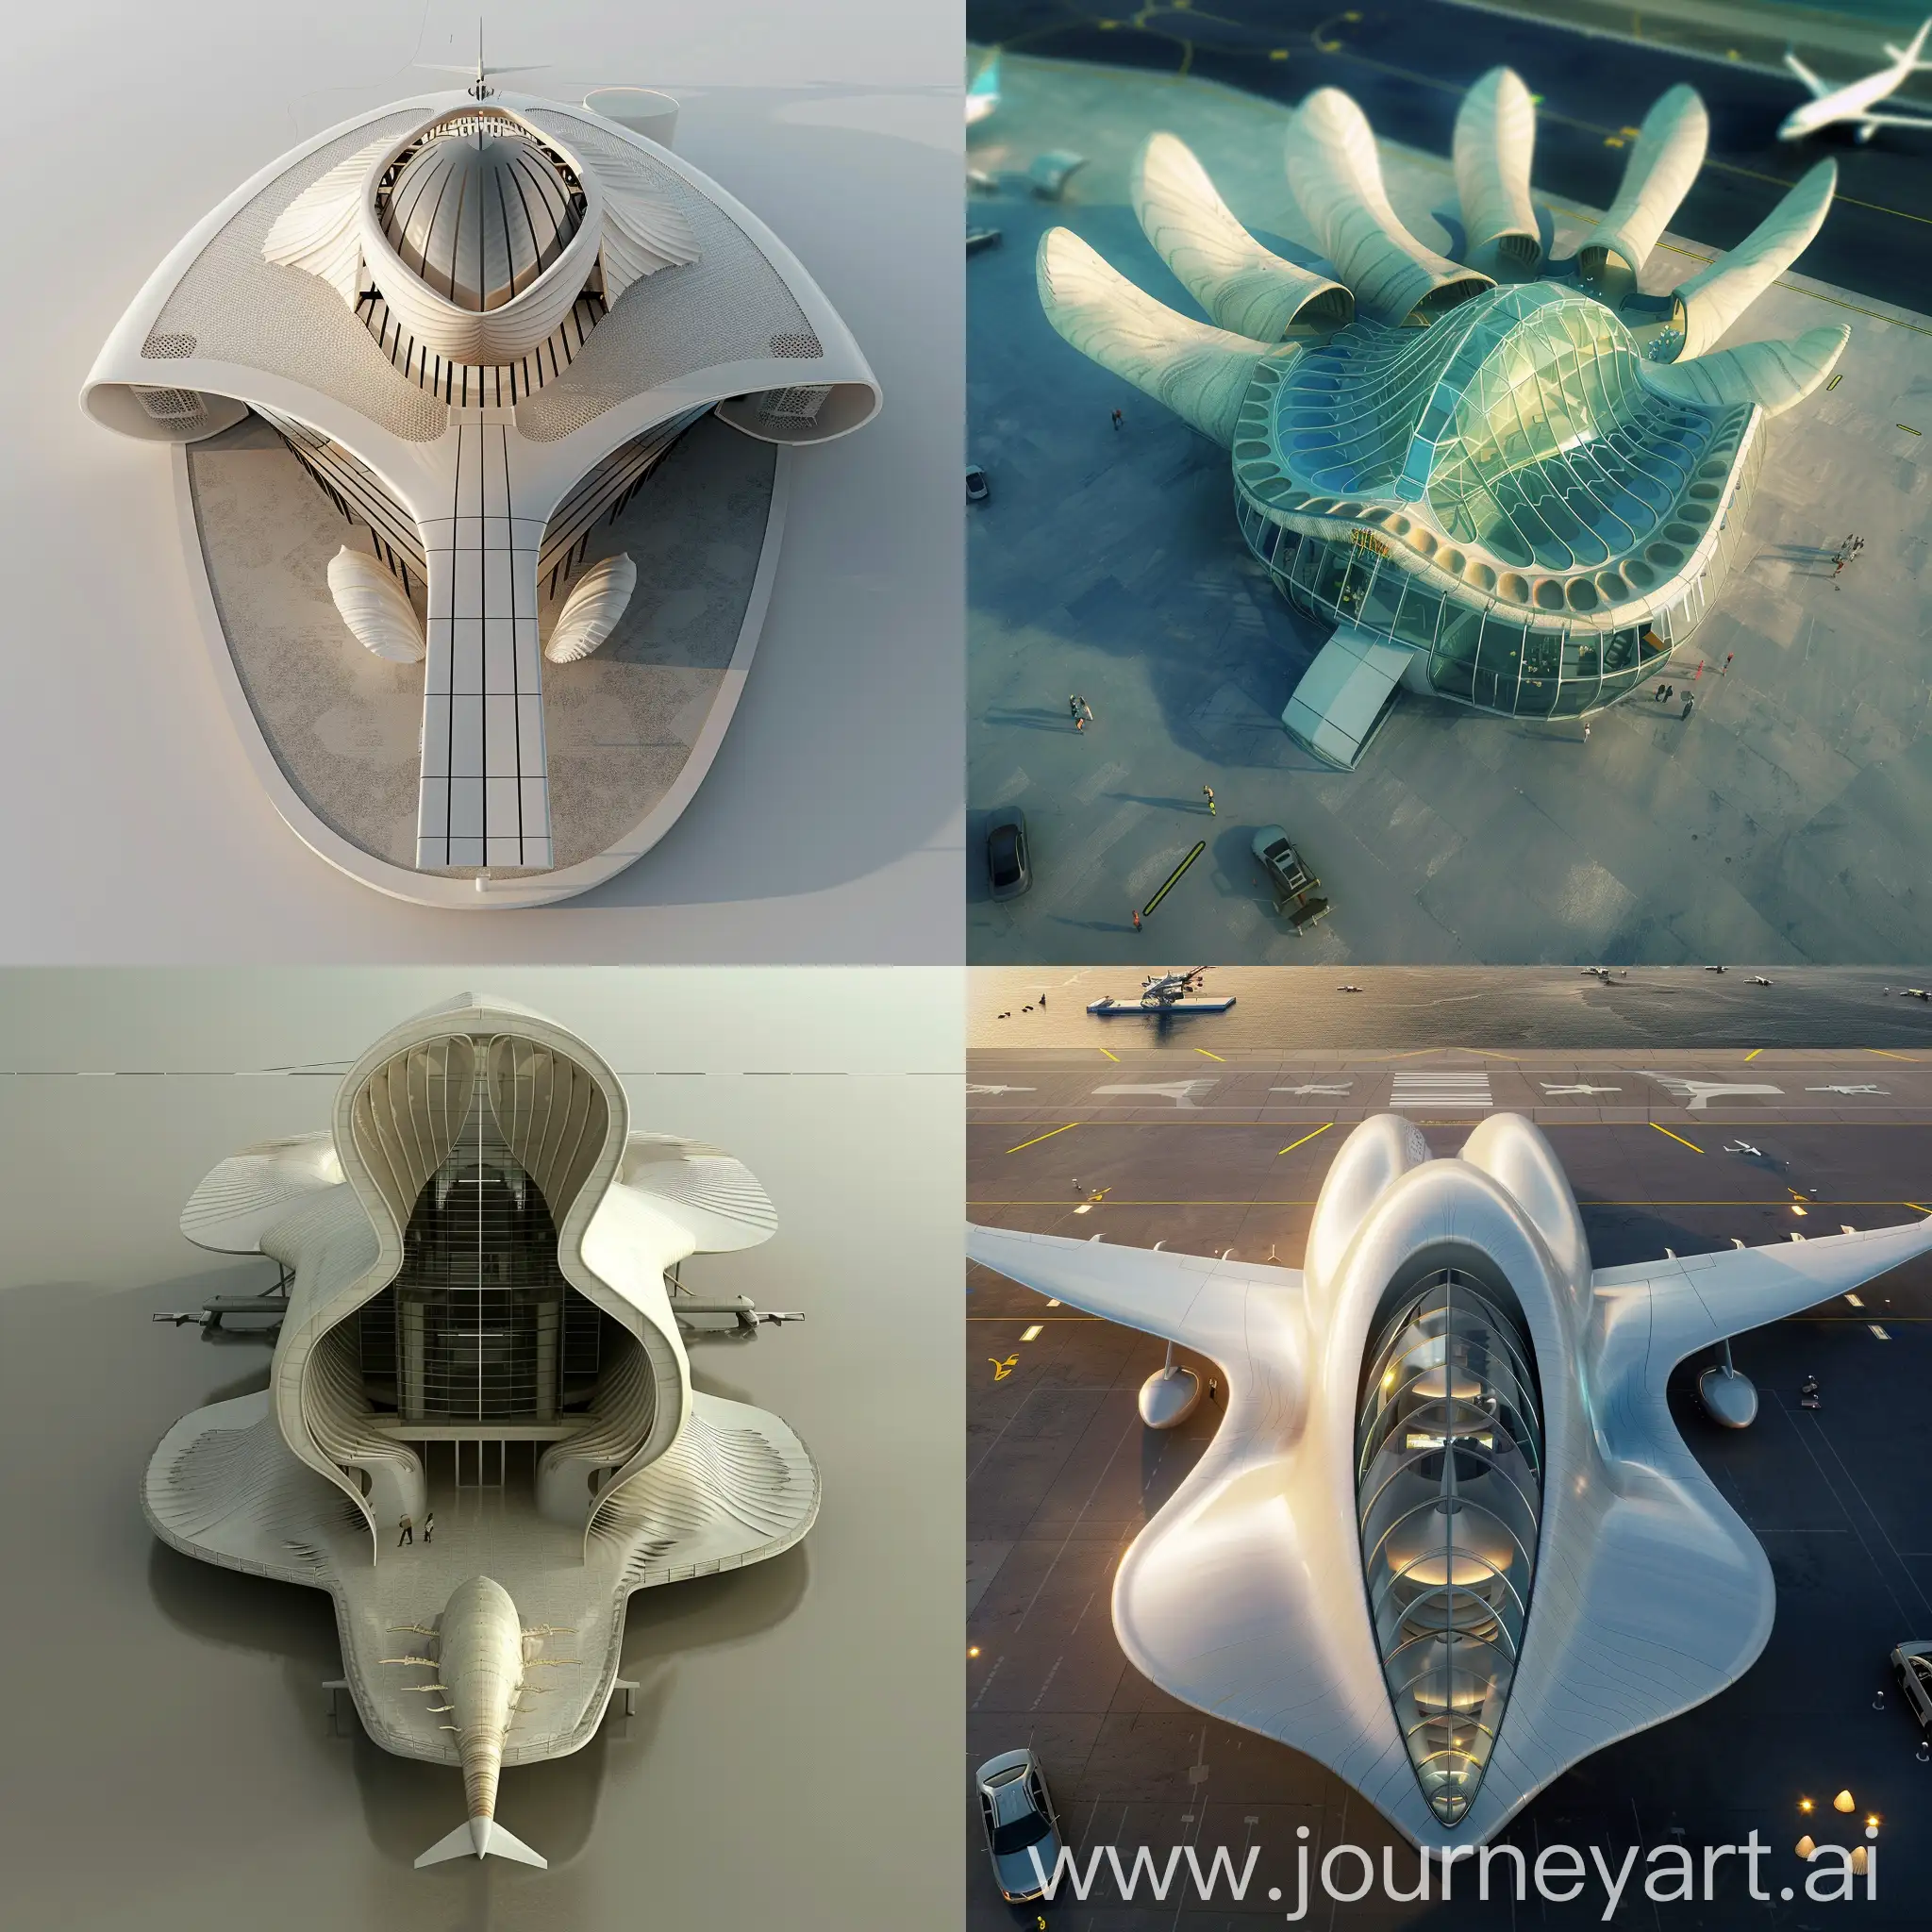 imagine a small  airport terminal building view from top view. the building is inspired my the sea shell which is incoporrated in the structure